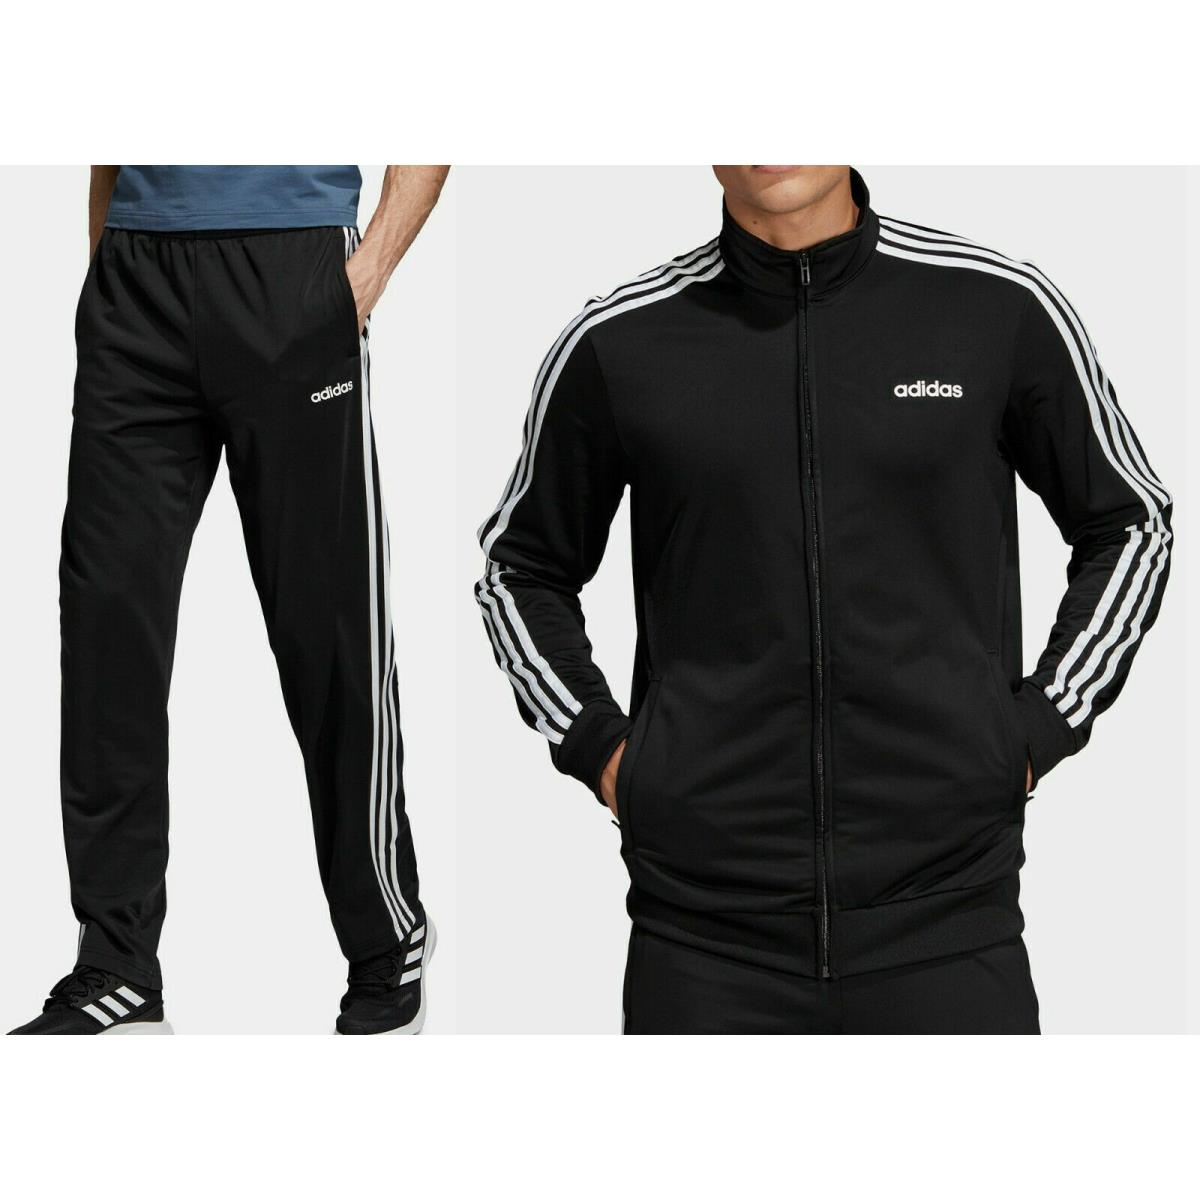 Adidas Men`s Matched Suite: Track Pants Jacket - Balck/white - All Sizes